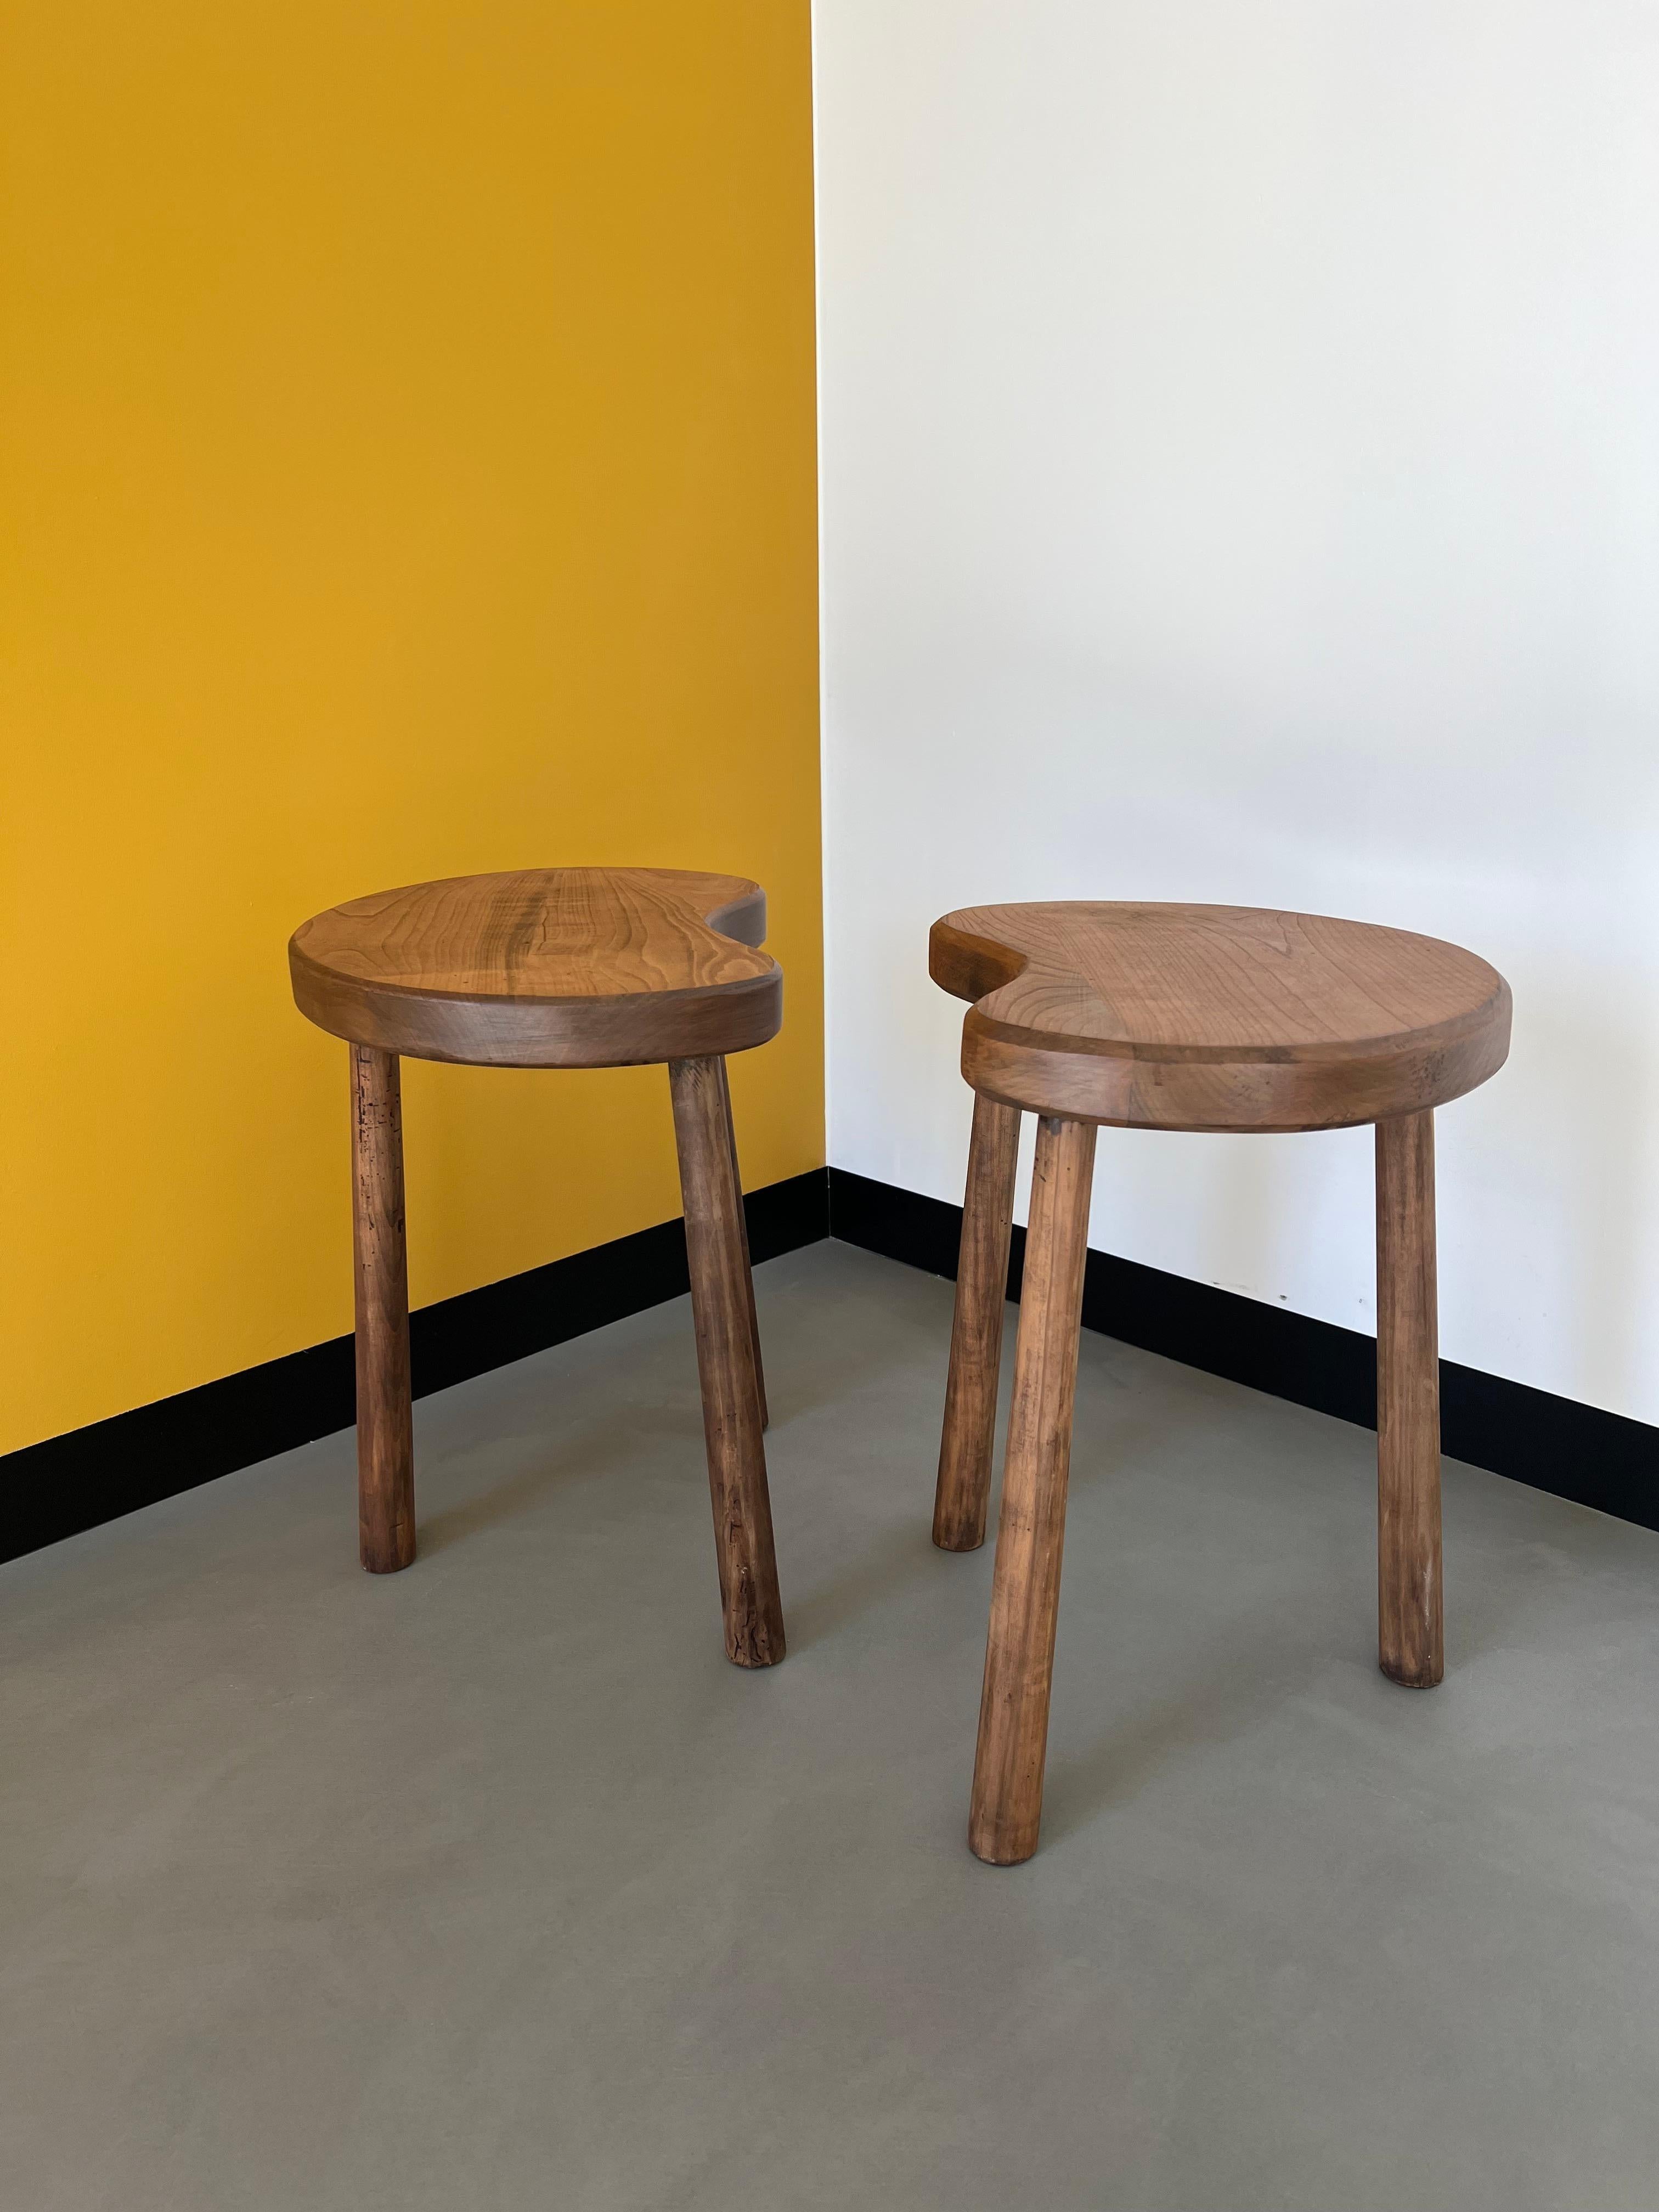 Superb pair of bean stools, French craftsmanship from the 1950s. The stools fit together harmoniously and have a crazy cachet.